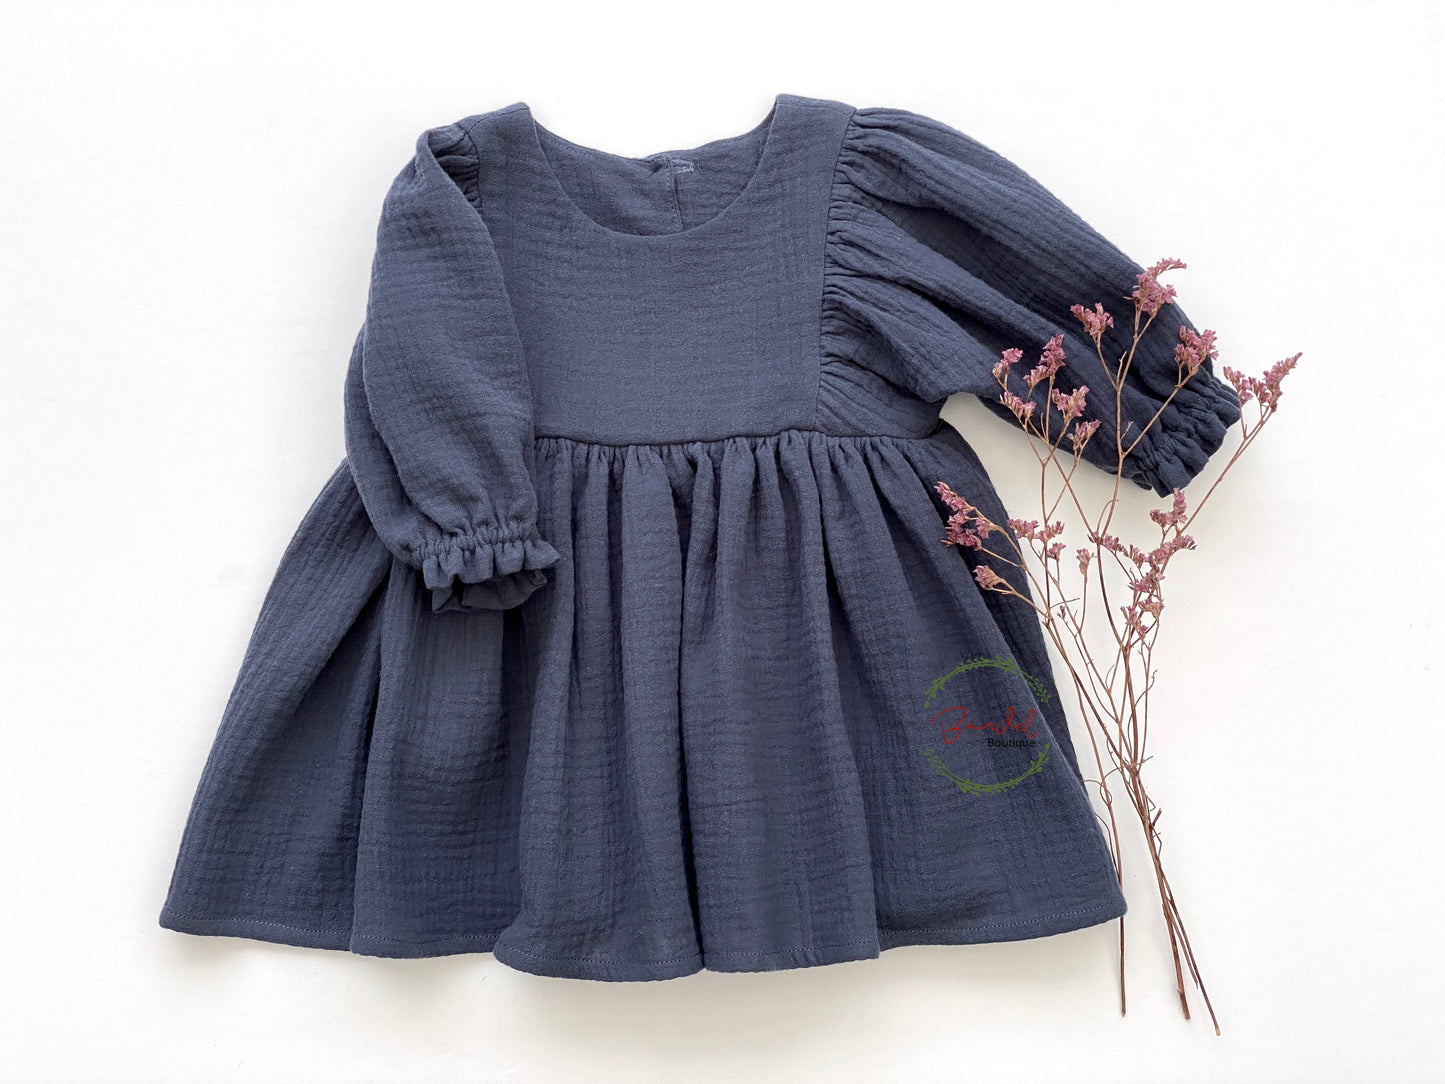 This stylish Denim Blue 3/4 Sleeves Muslin Dress is made from organic muslin and features a whimsical style with ruffled hem and elastic casing. It also has a wooden button closure on the back bodice and reaches the knee length. Perfect for any occasion!